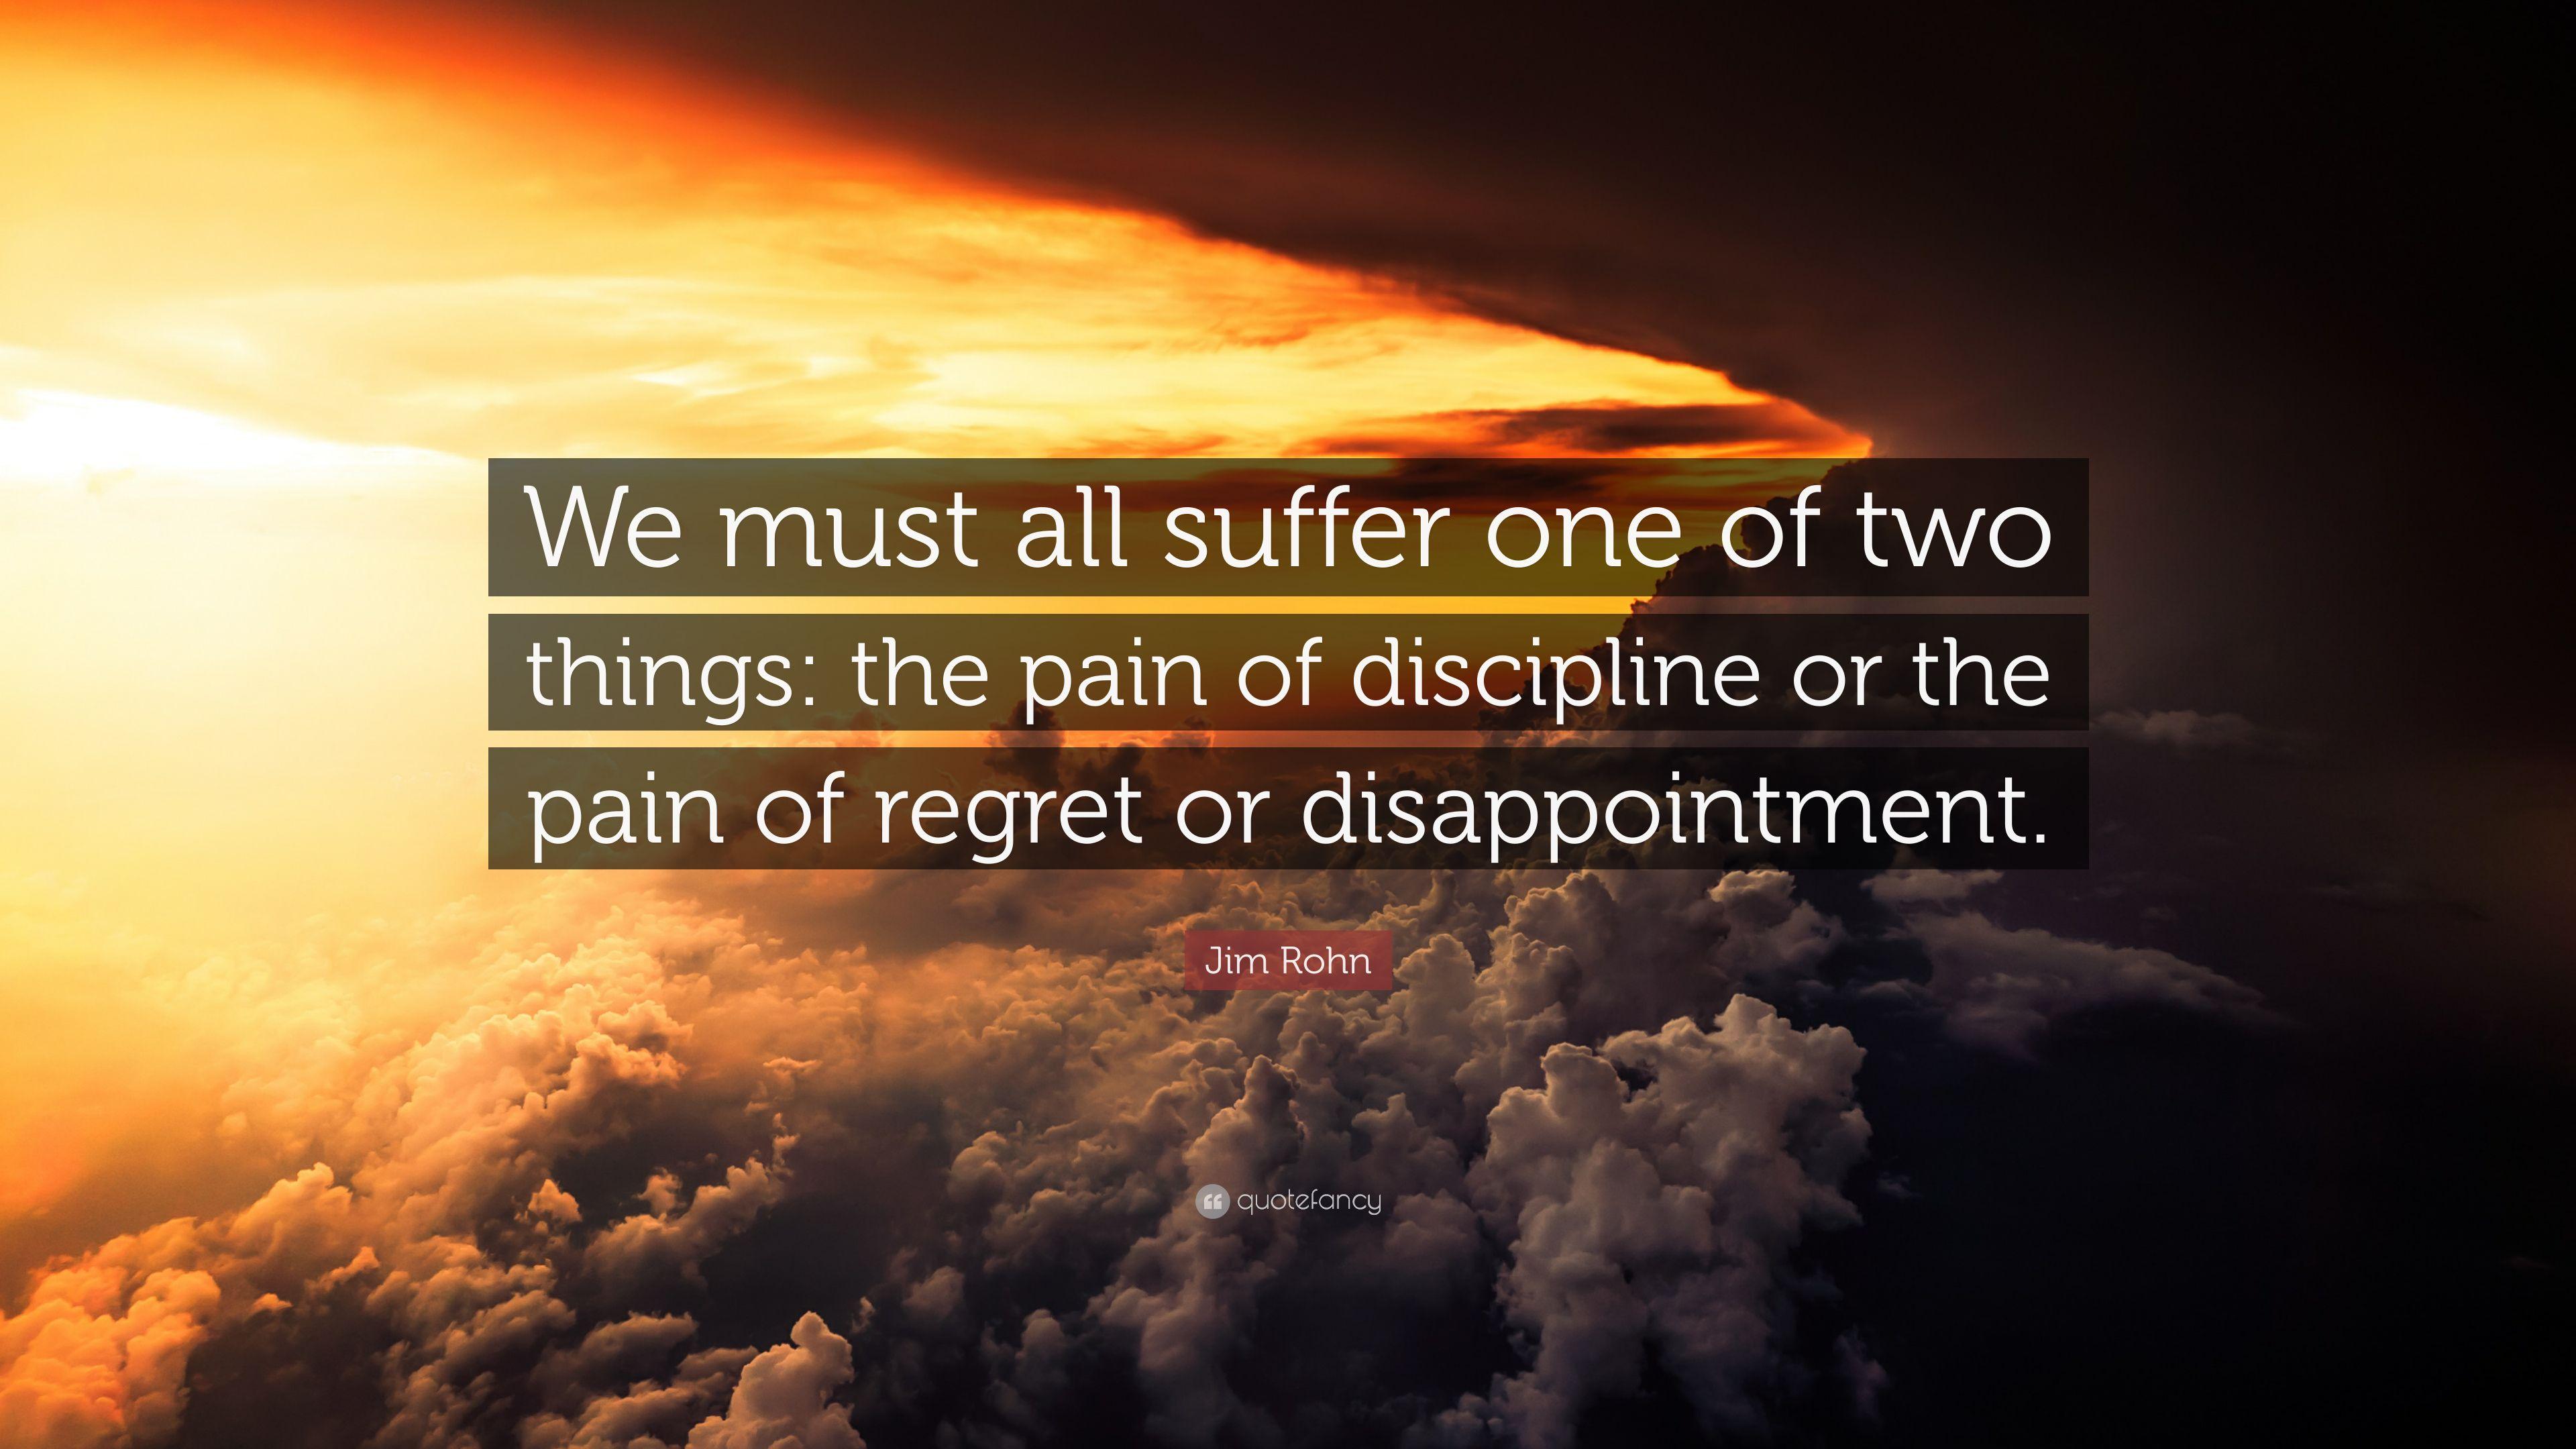 Jim Rohn Quote: “We must all suffer one of two things: the pain